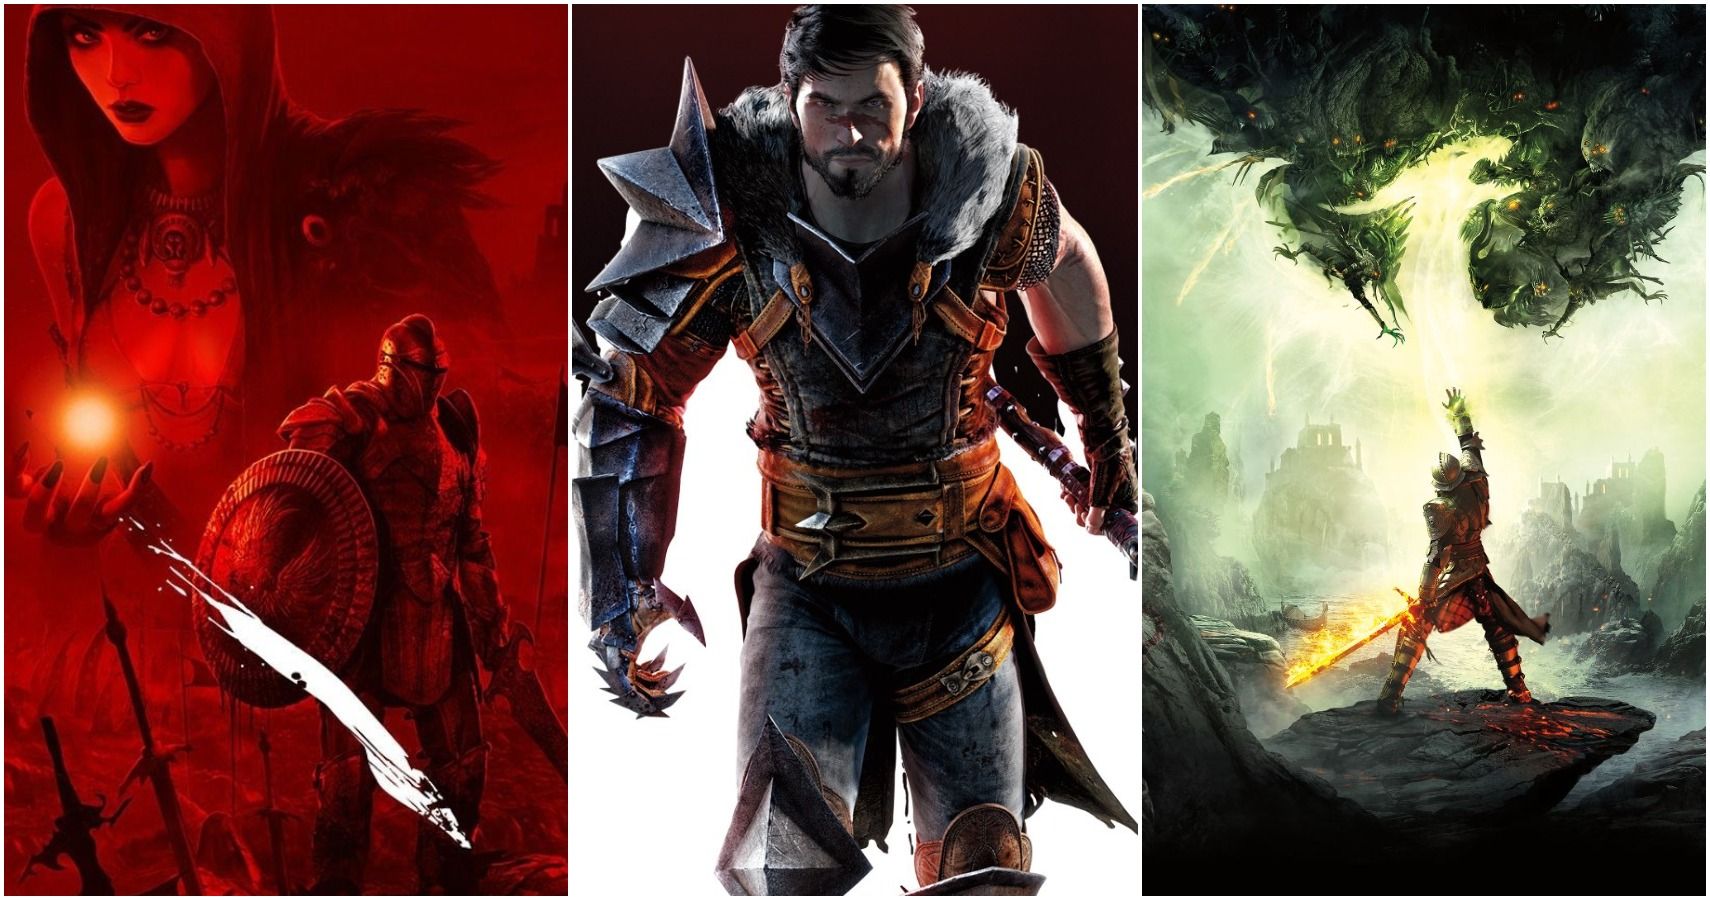 dragon age series in order